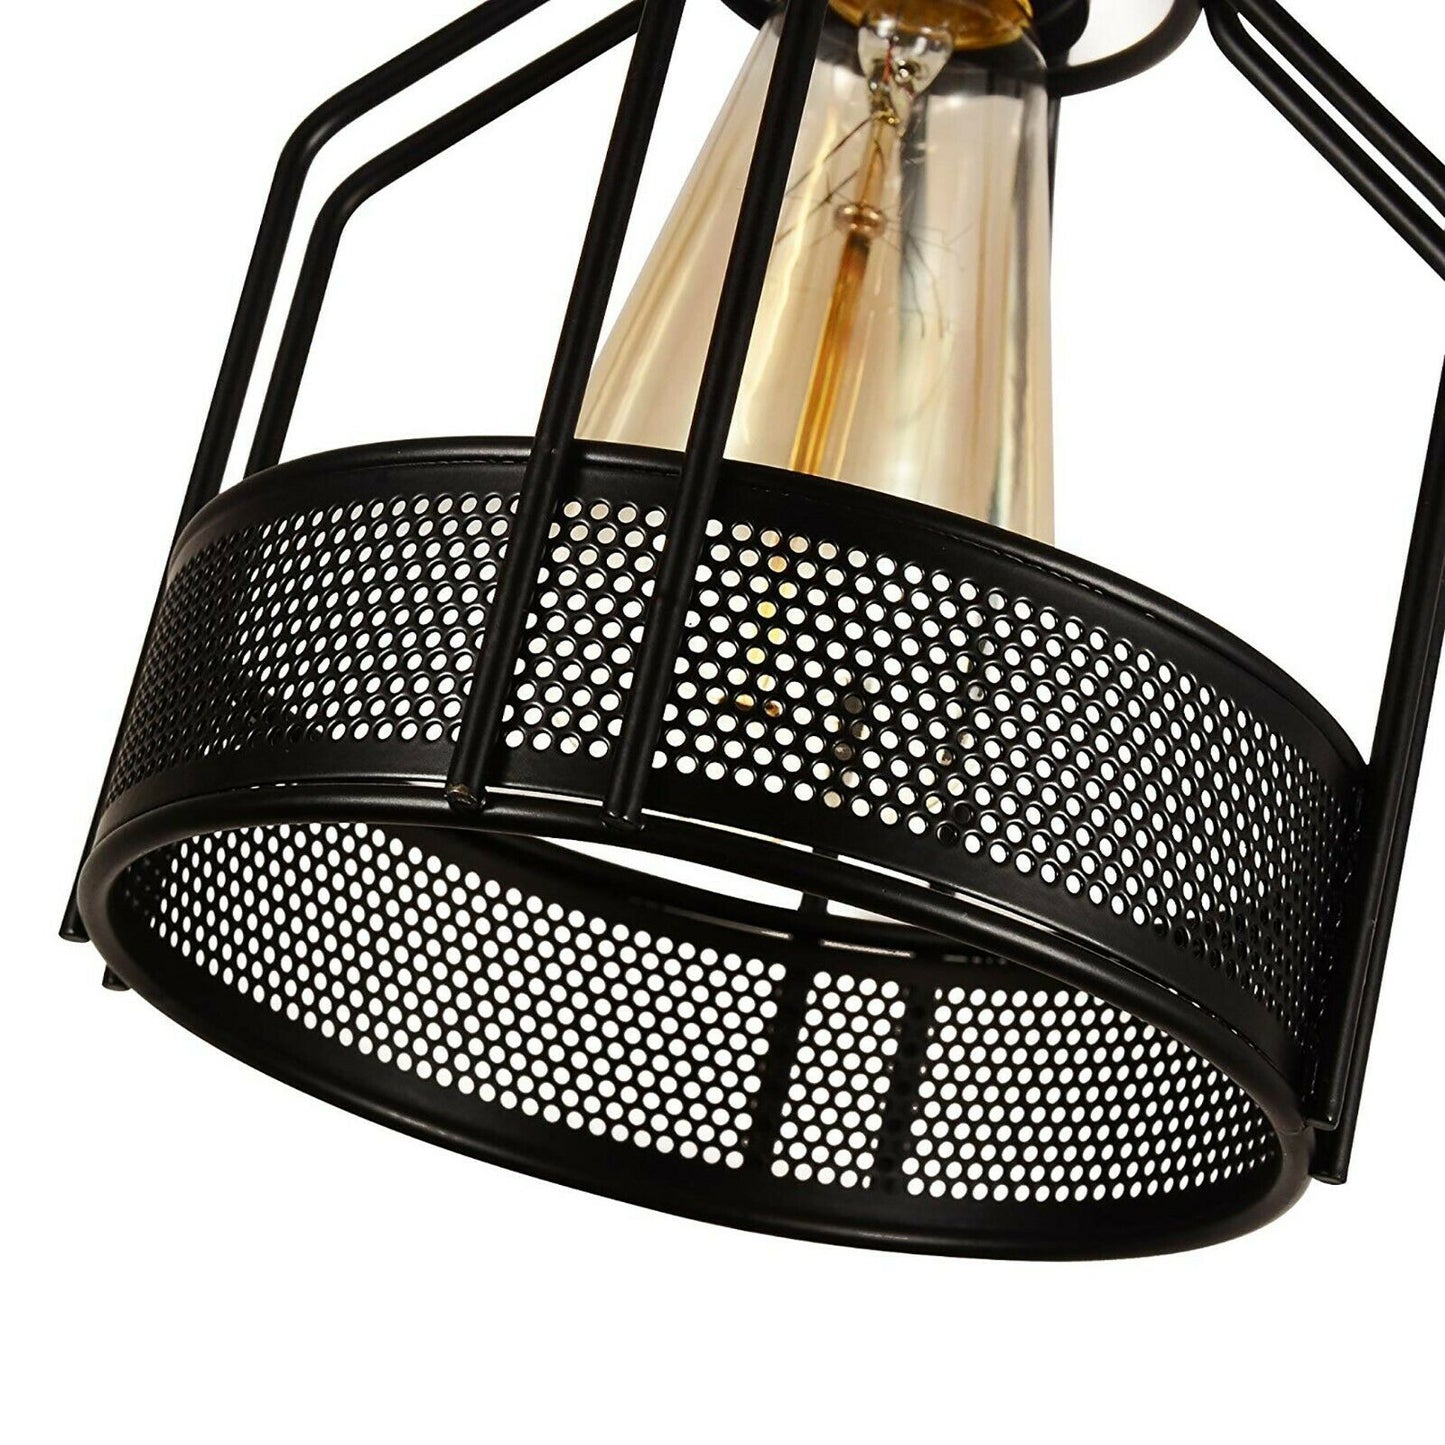 3 Way Industrial Retro Wire Cage Ceiling Cluster Pendant Light